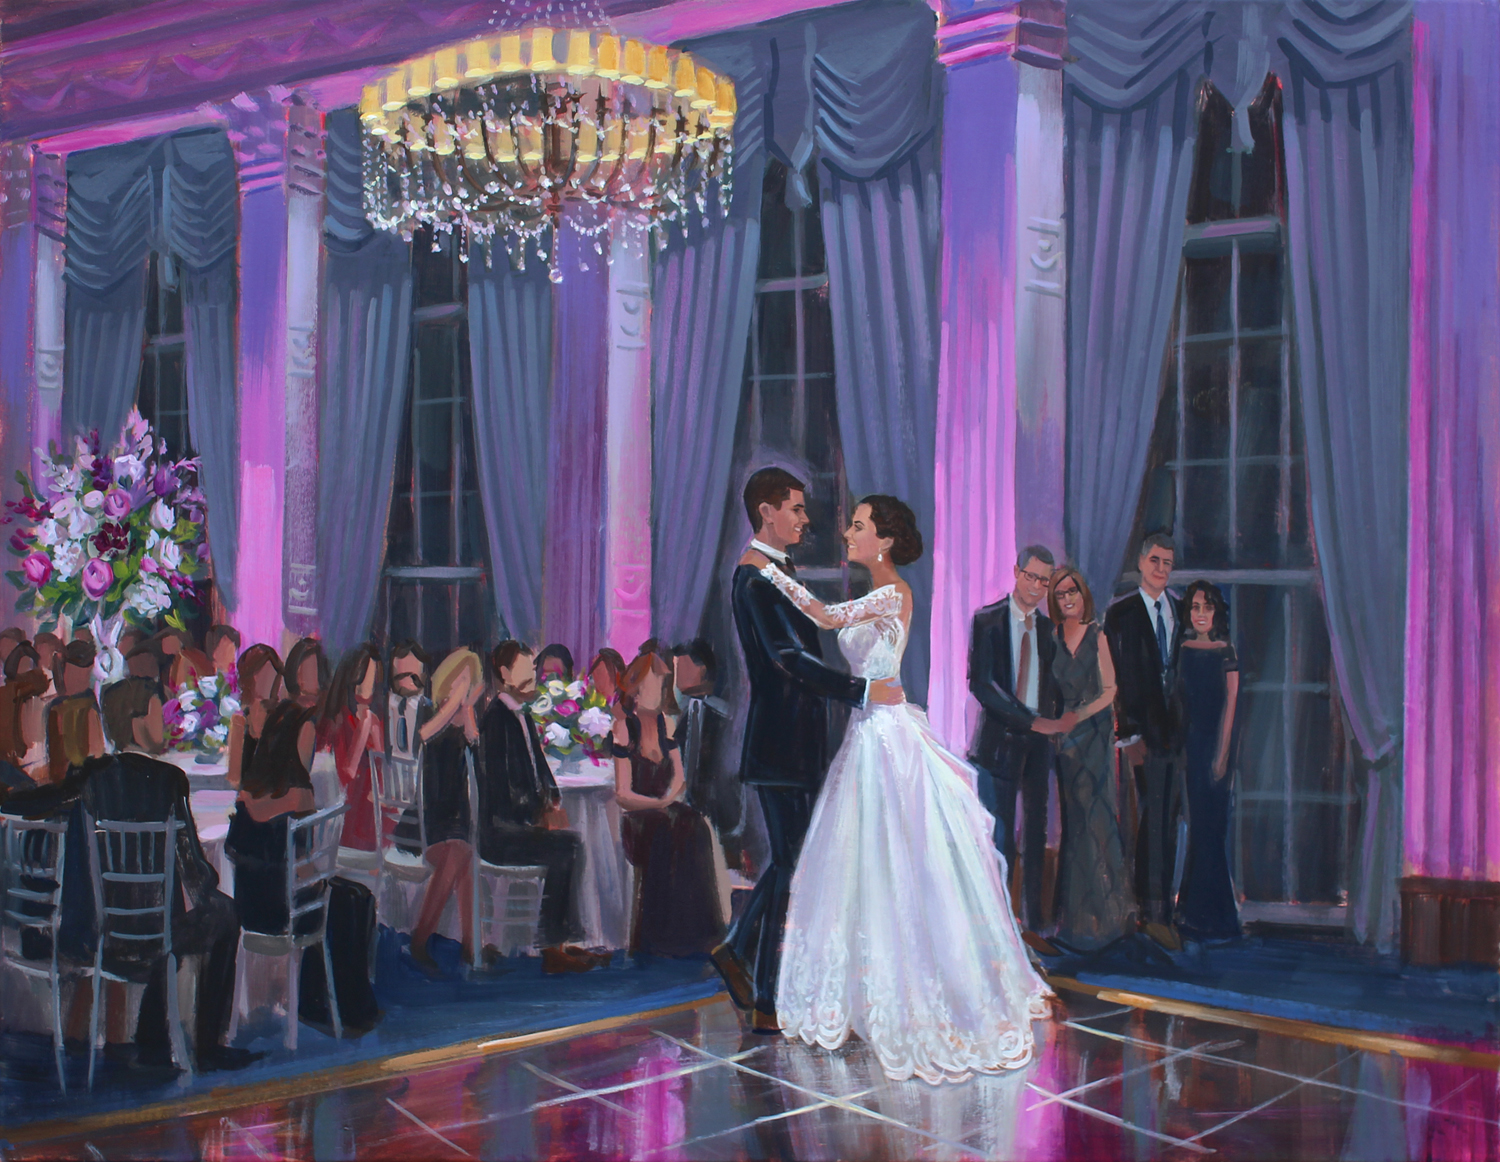 Live Wedding Painter, Ben Keys, captured Abbey + Andrews romantic first dance during their reception at the Mariott Grand in St. Louis, MO.